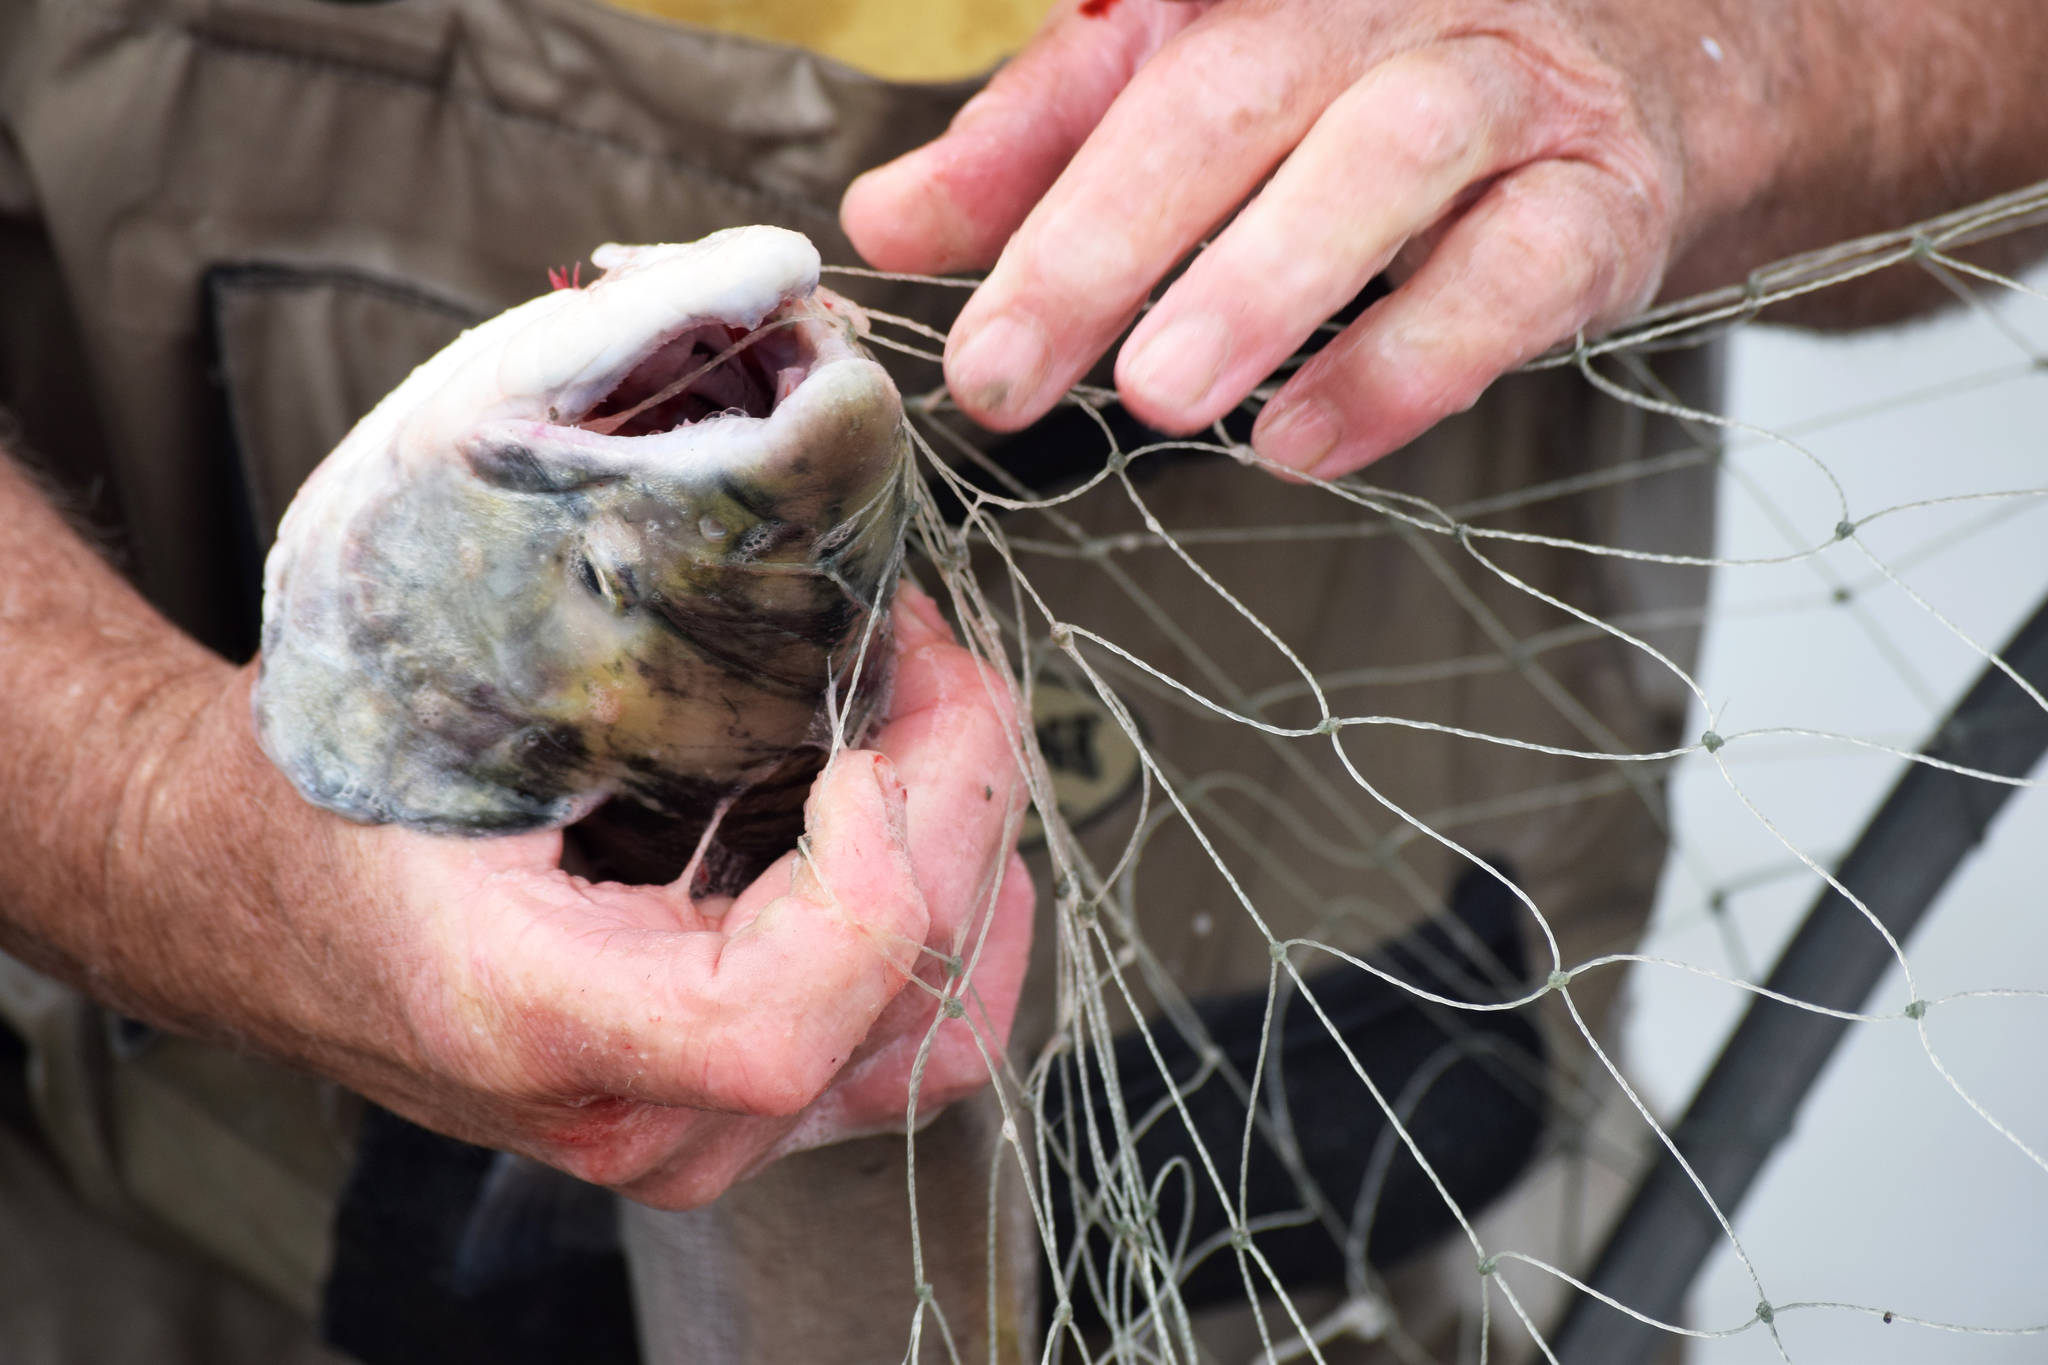 A dipnetter works to untangle a sockeye salmon from his net on Tuesday, July 31, 2018 in Kasilof, Alaska. (Photo by Elizabeth Earl/Peninsula Clarion)